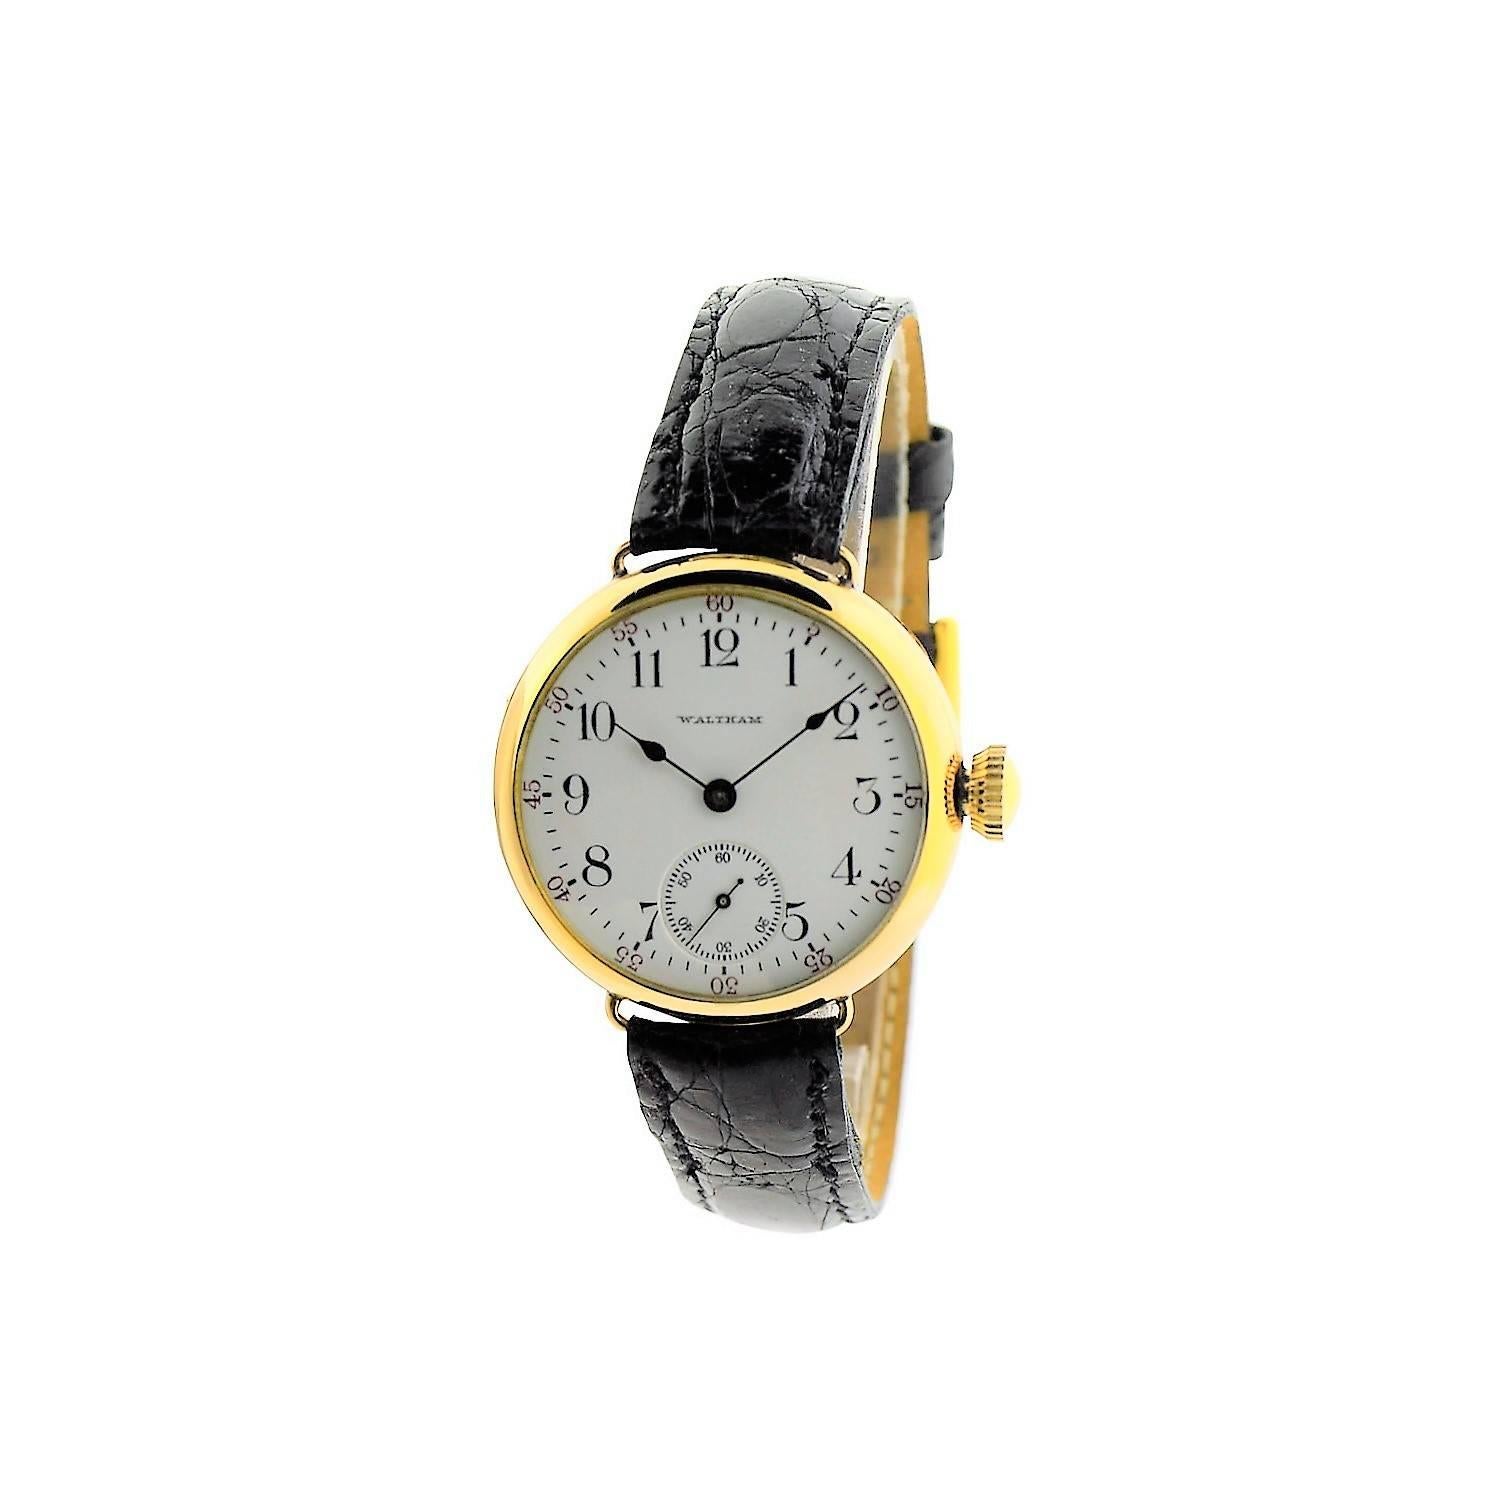 FACTORY / HOUSE: Waltham Watch Company
STYLE / REFERENCE: Military Style / Art Deco
METAL / MATERIAL: Yellow Gold Filled
DIMENSIONS:  45mm  X  35mm
CIRCA: 1908 / 1910
MOVEMENT / CALIBER: Manual Winding / 17 Jewels / Damascened Plates
DIAL / HANDS: